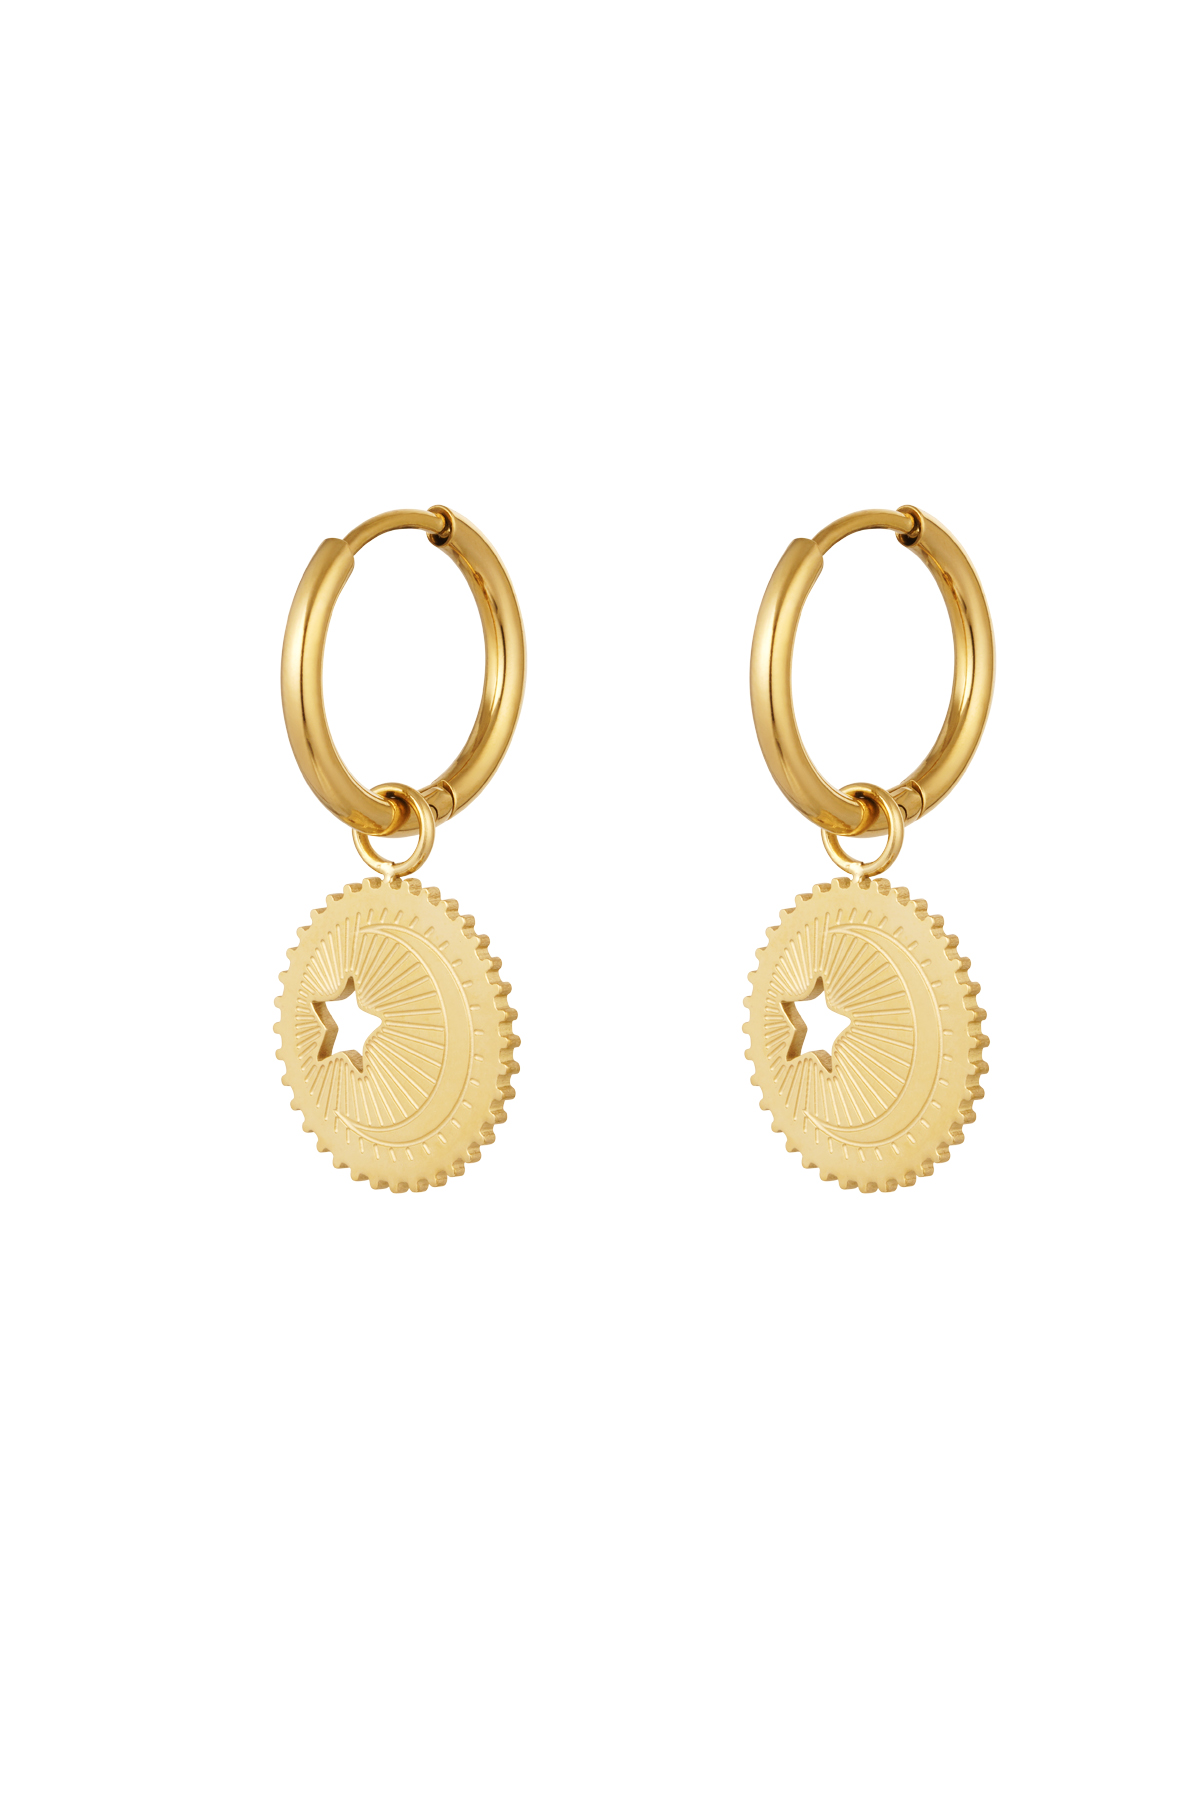 Earrings star coin - gold Stainless Steel 